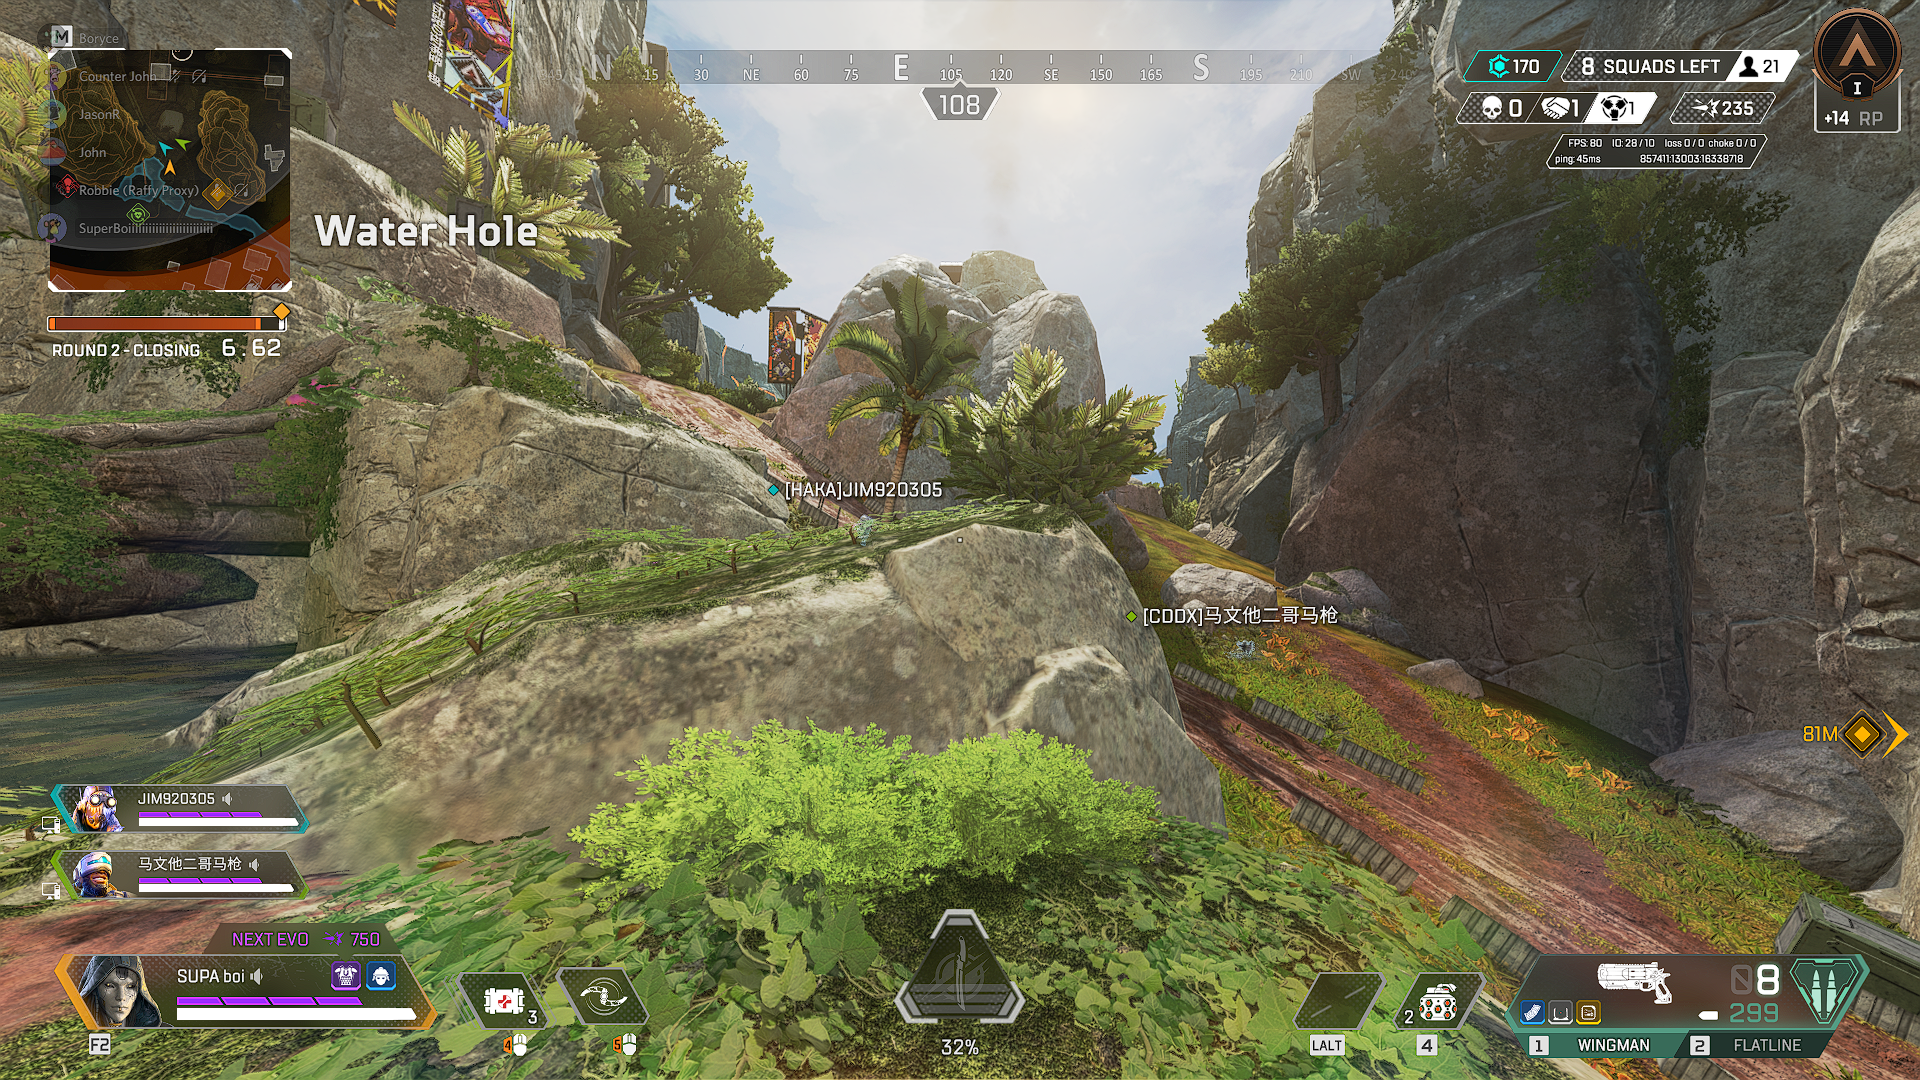 How to Use a Playstation Controller in Apex Legends on PC